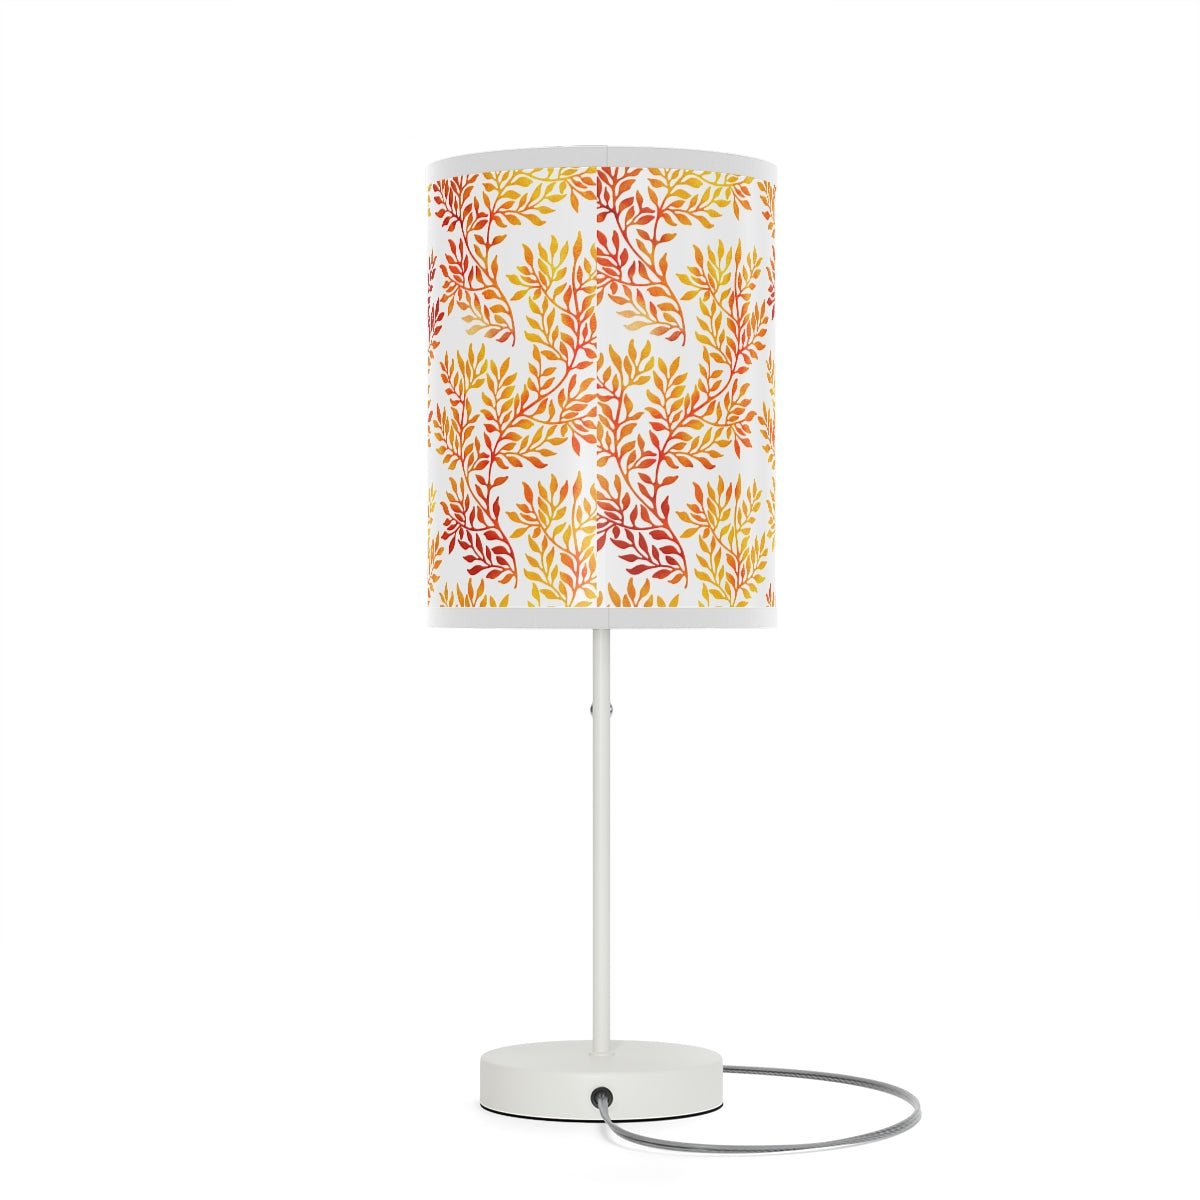 Fall Red and Orange Leaves Table Lamp - Puffin Lime